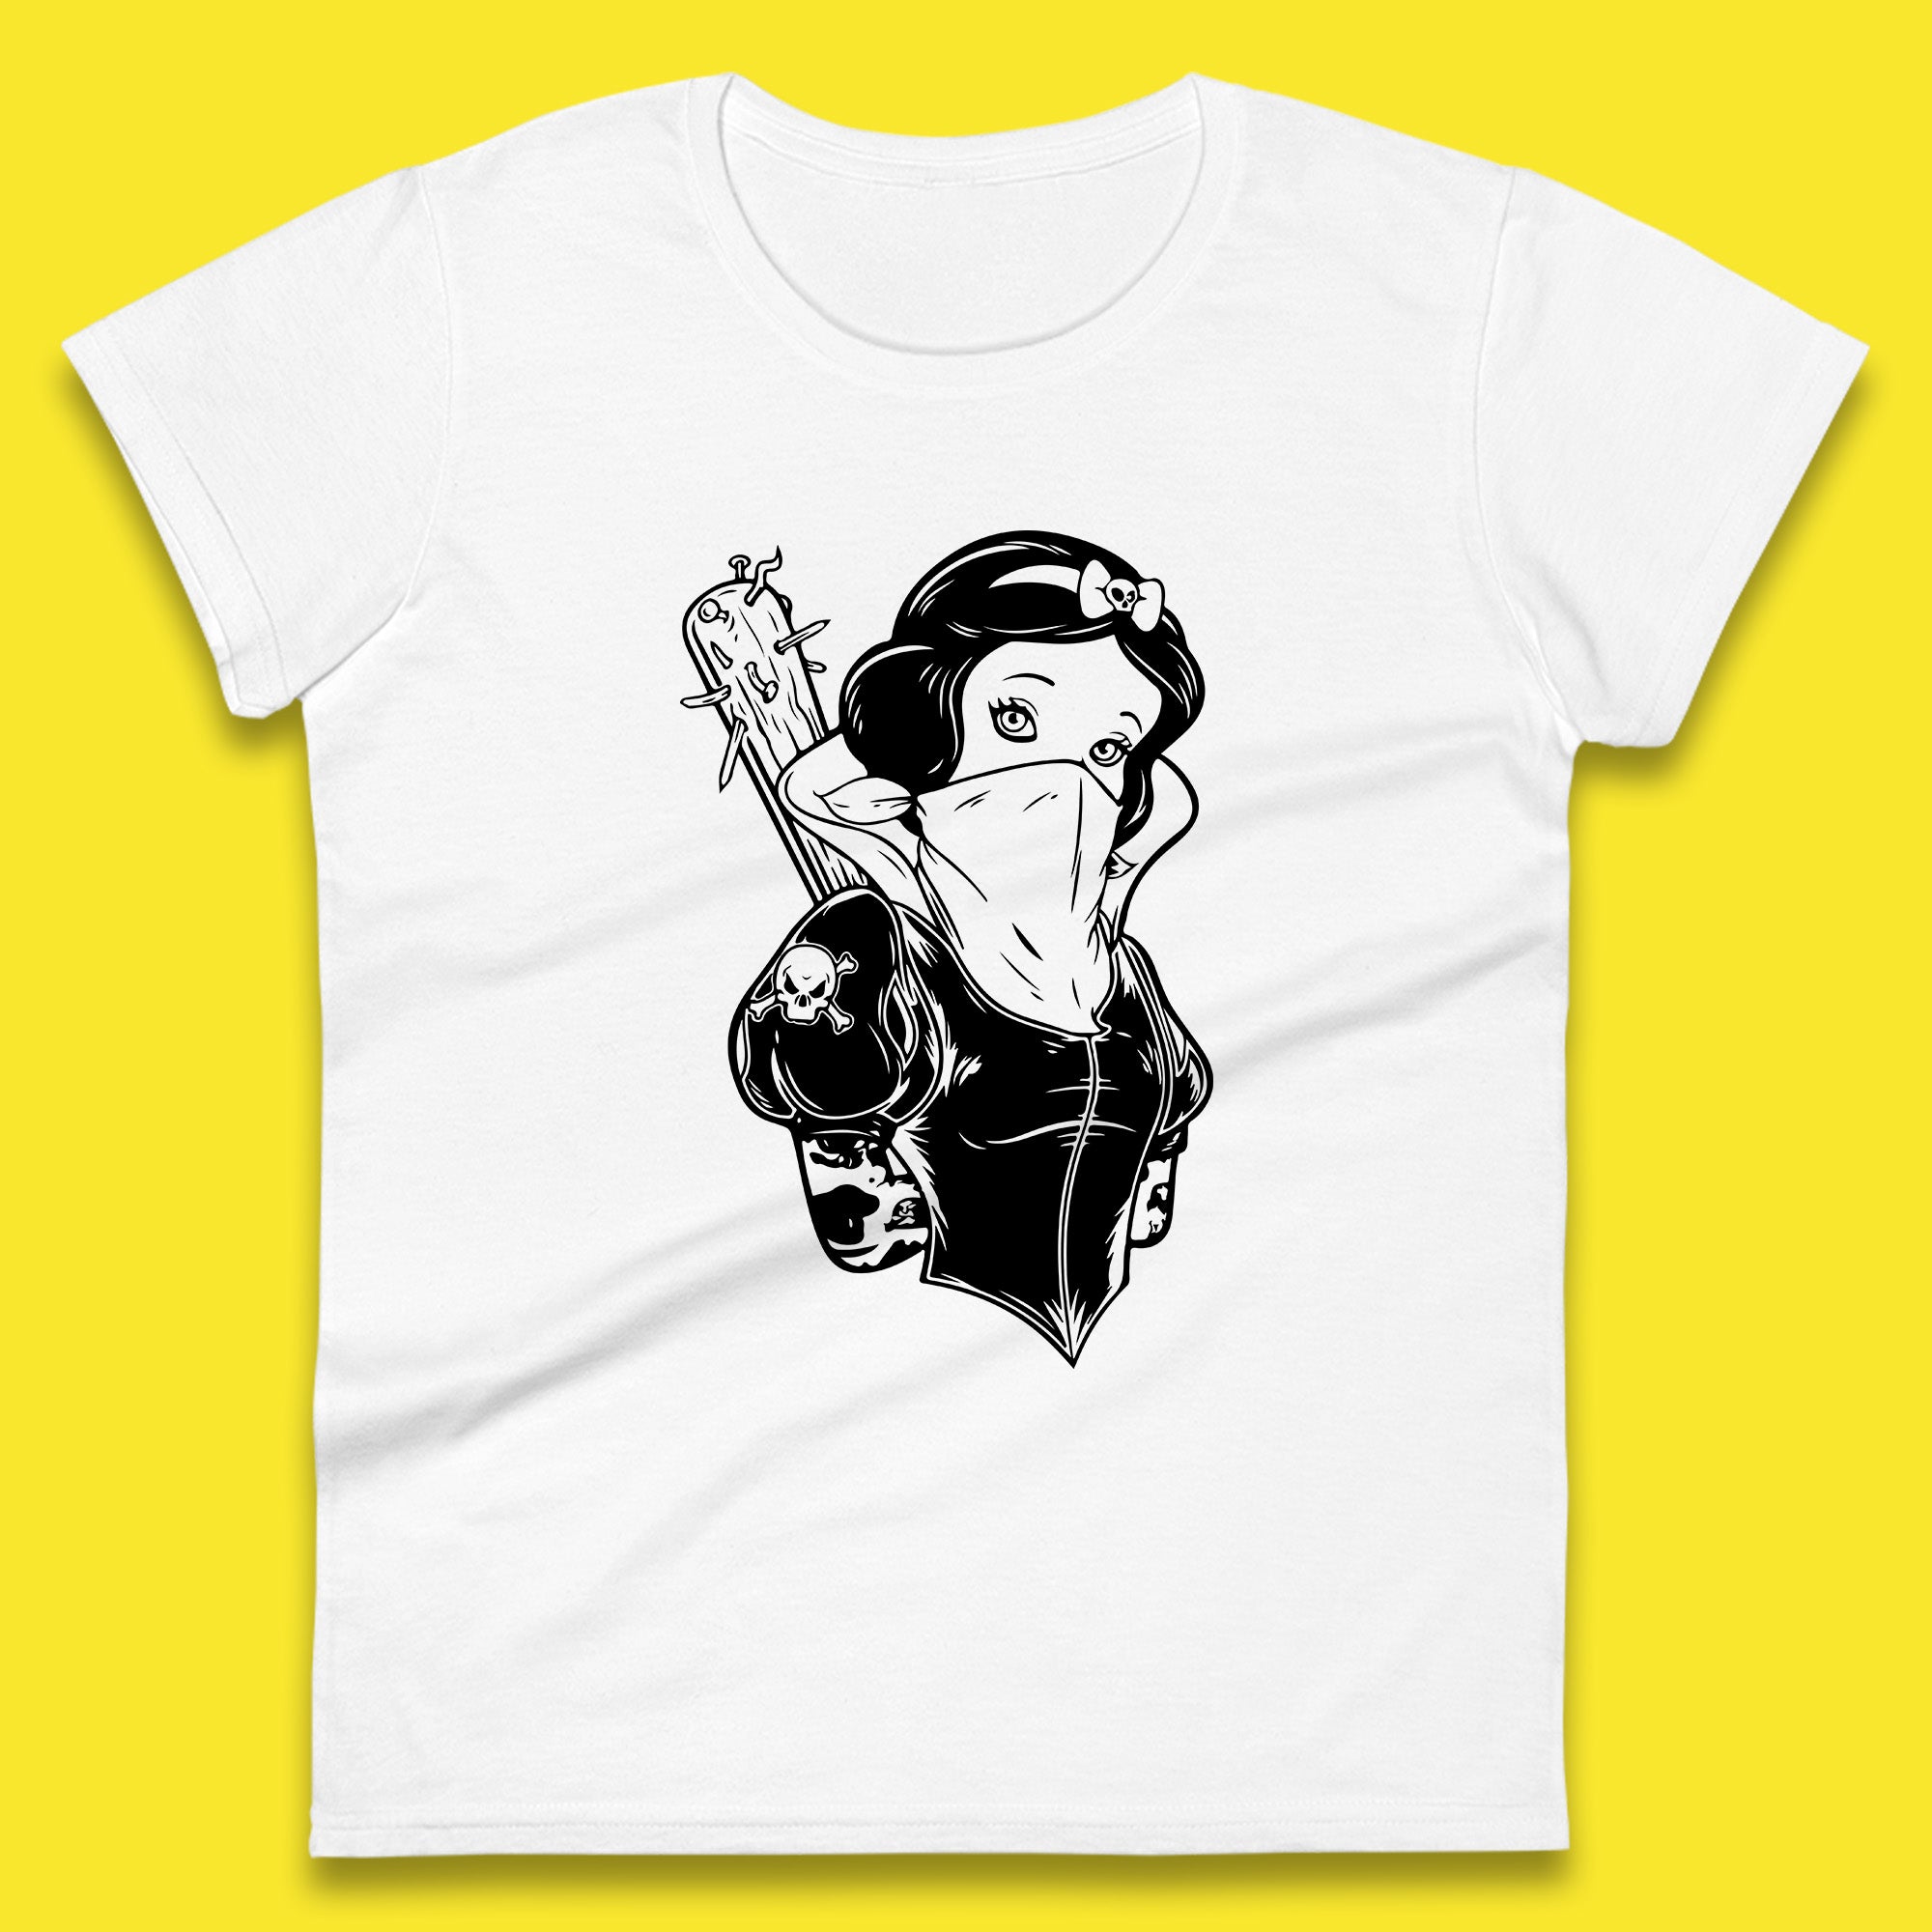 Not So Snow White Twisted Rock Parody Disney Princess Gangster Skull Tattoo Punk Princess Tattooed Emo Alice In A Jack Womens Tee Top